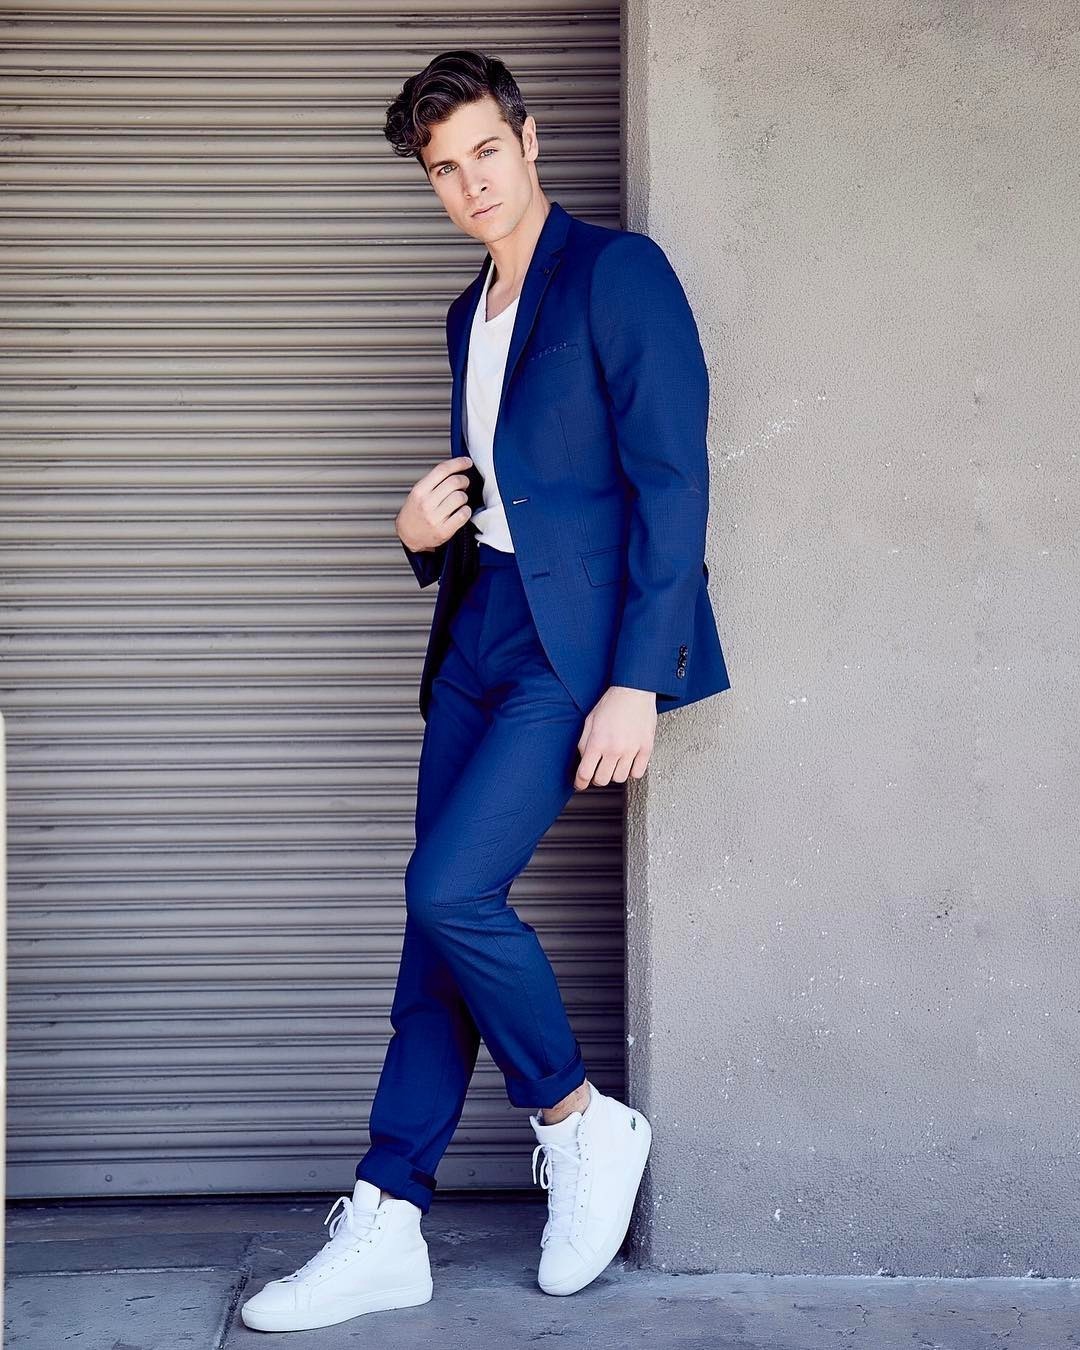 How to Wear a Suit with White Sneakers – The Fashionisto